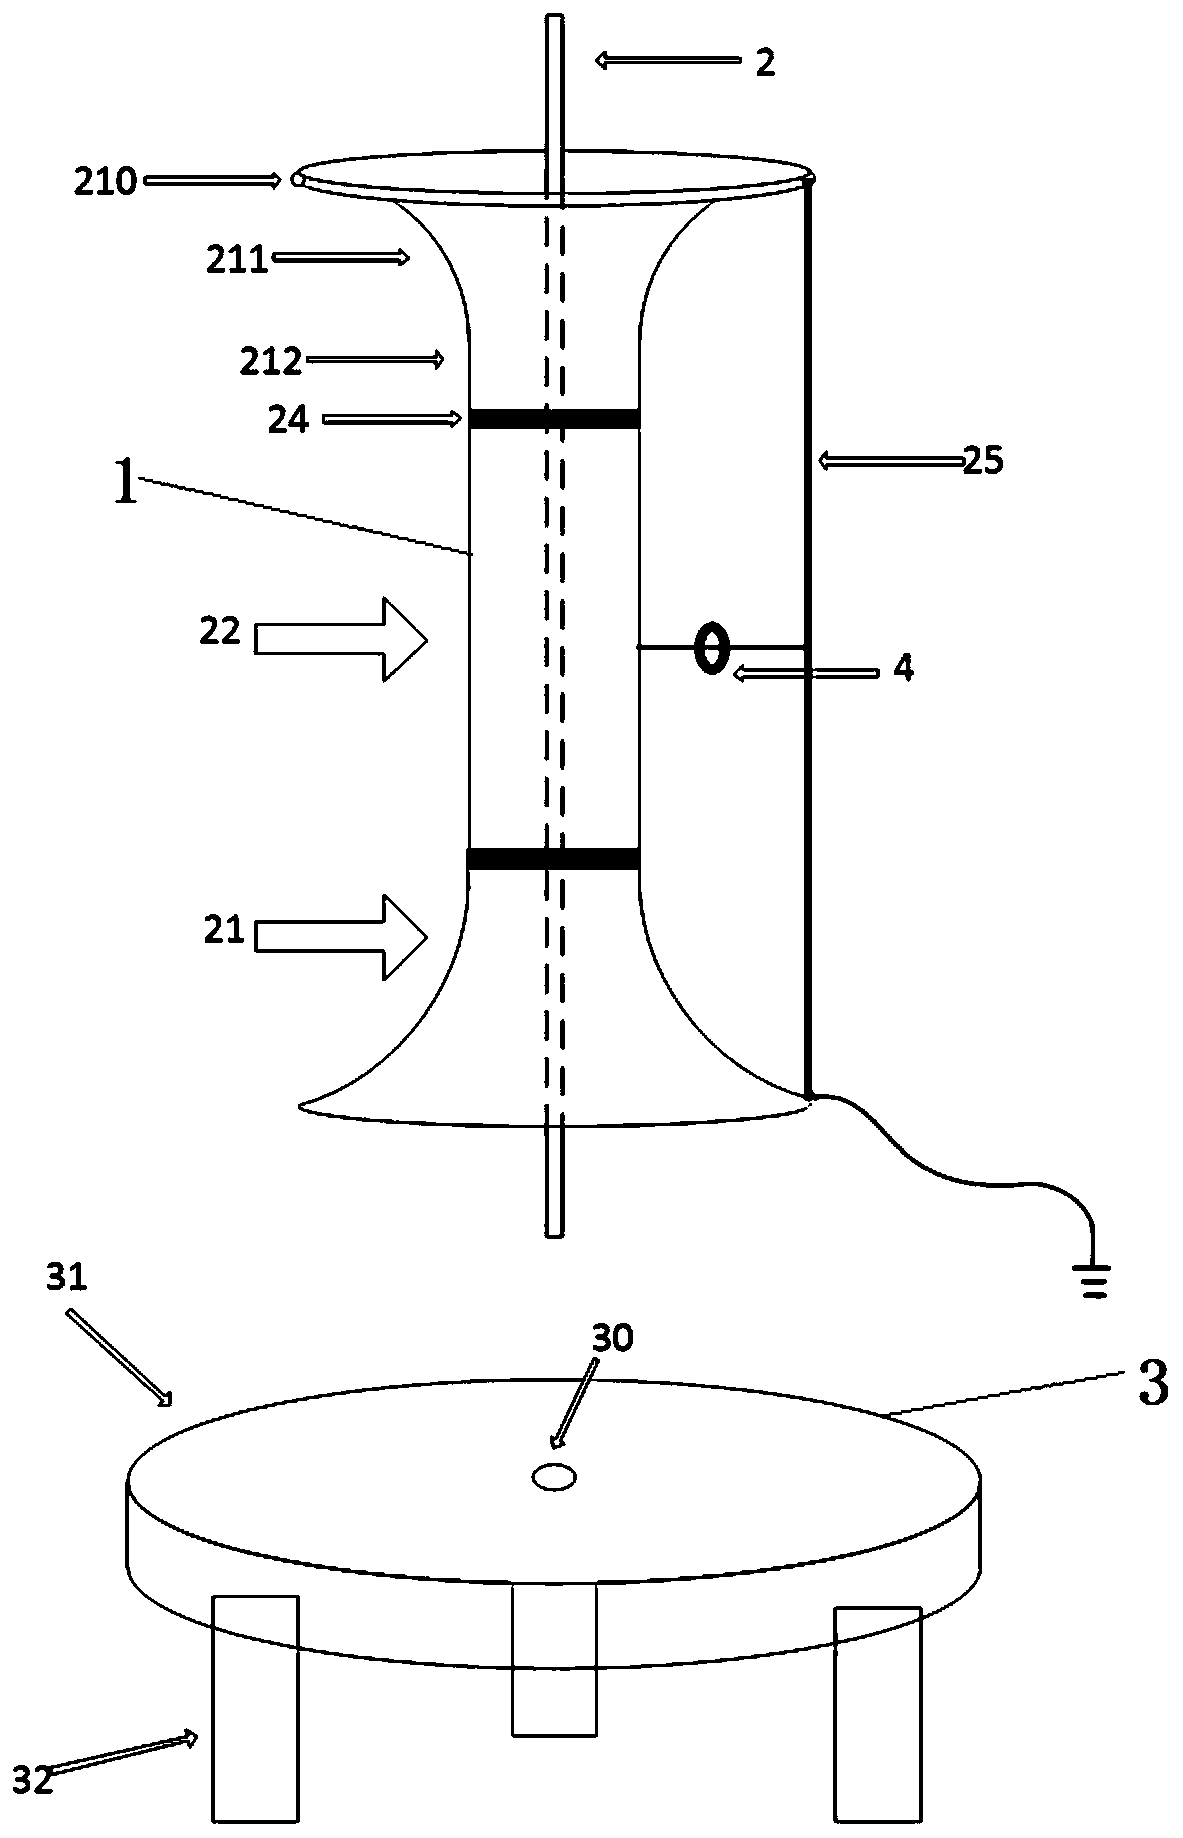 A device and method for observing the impact discharge characteristics of soil around a ground rod